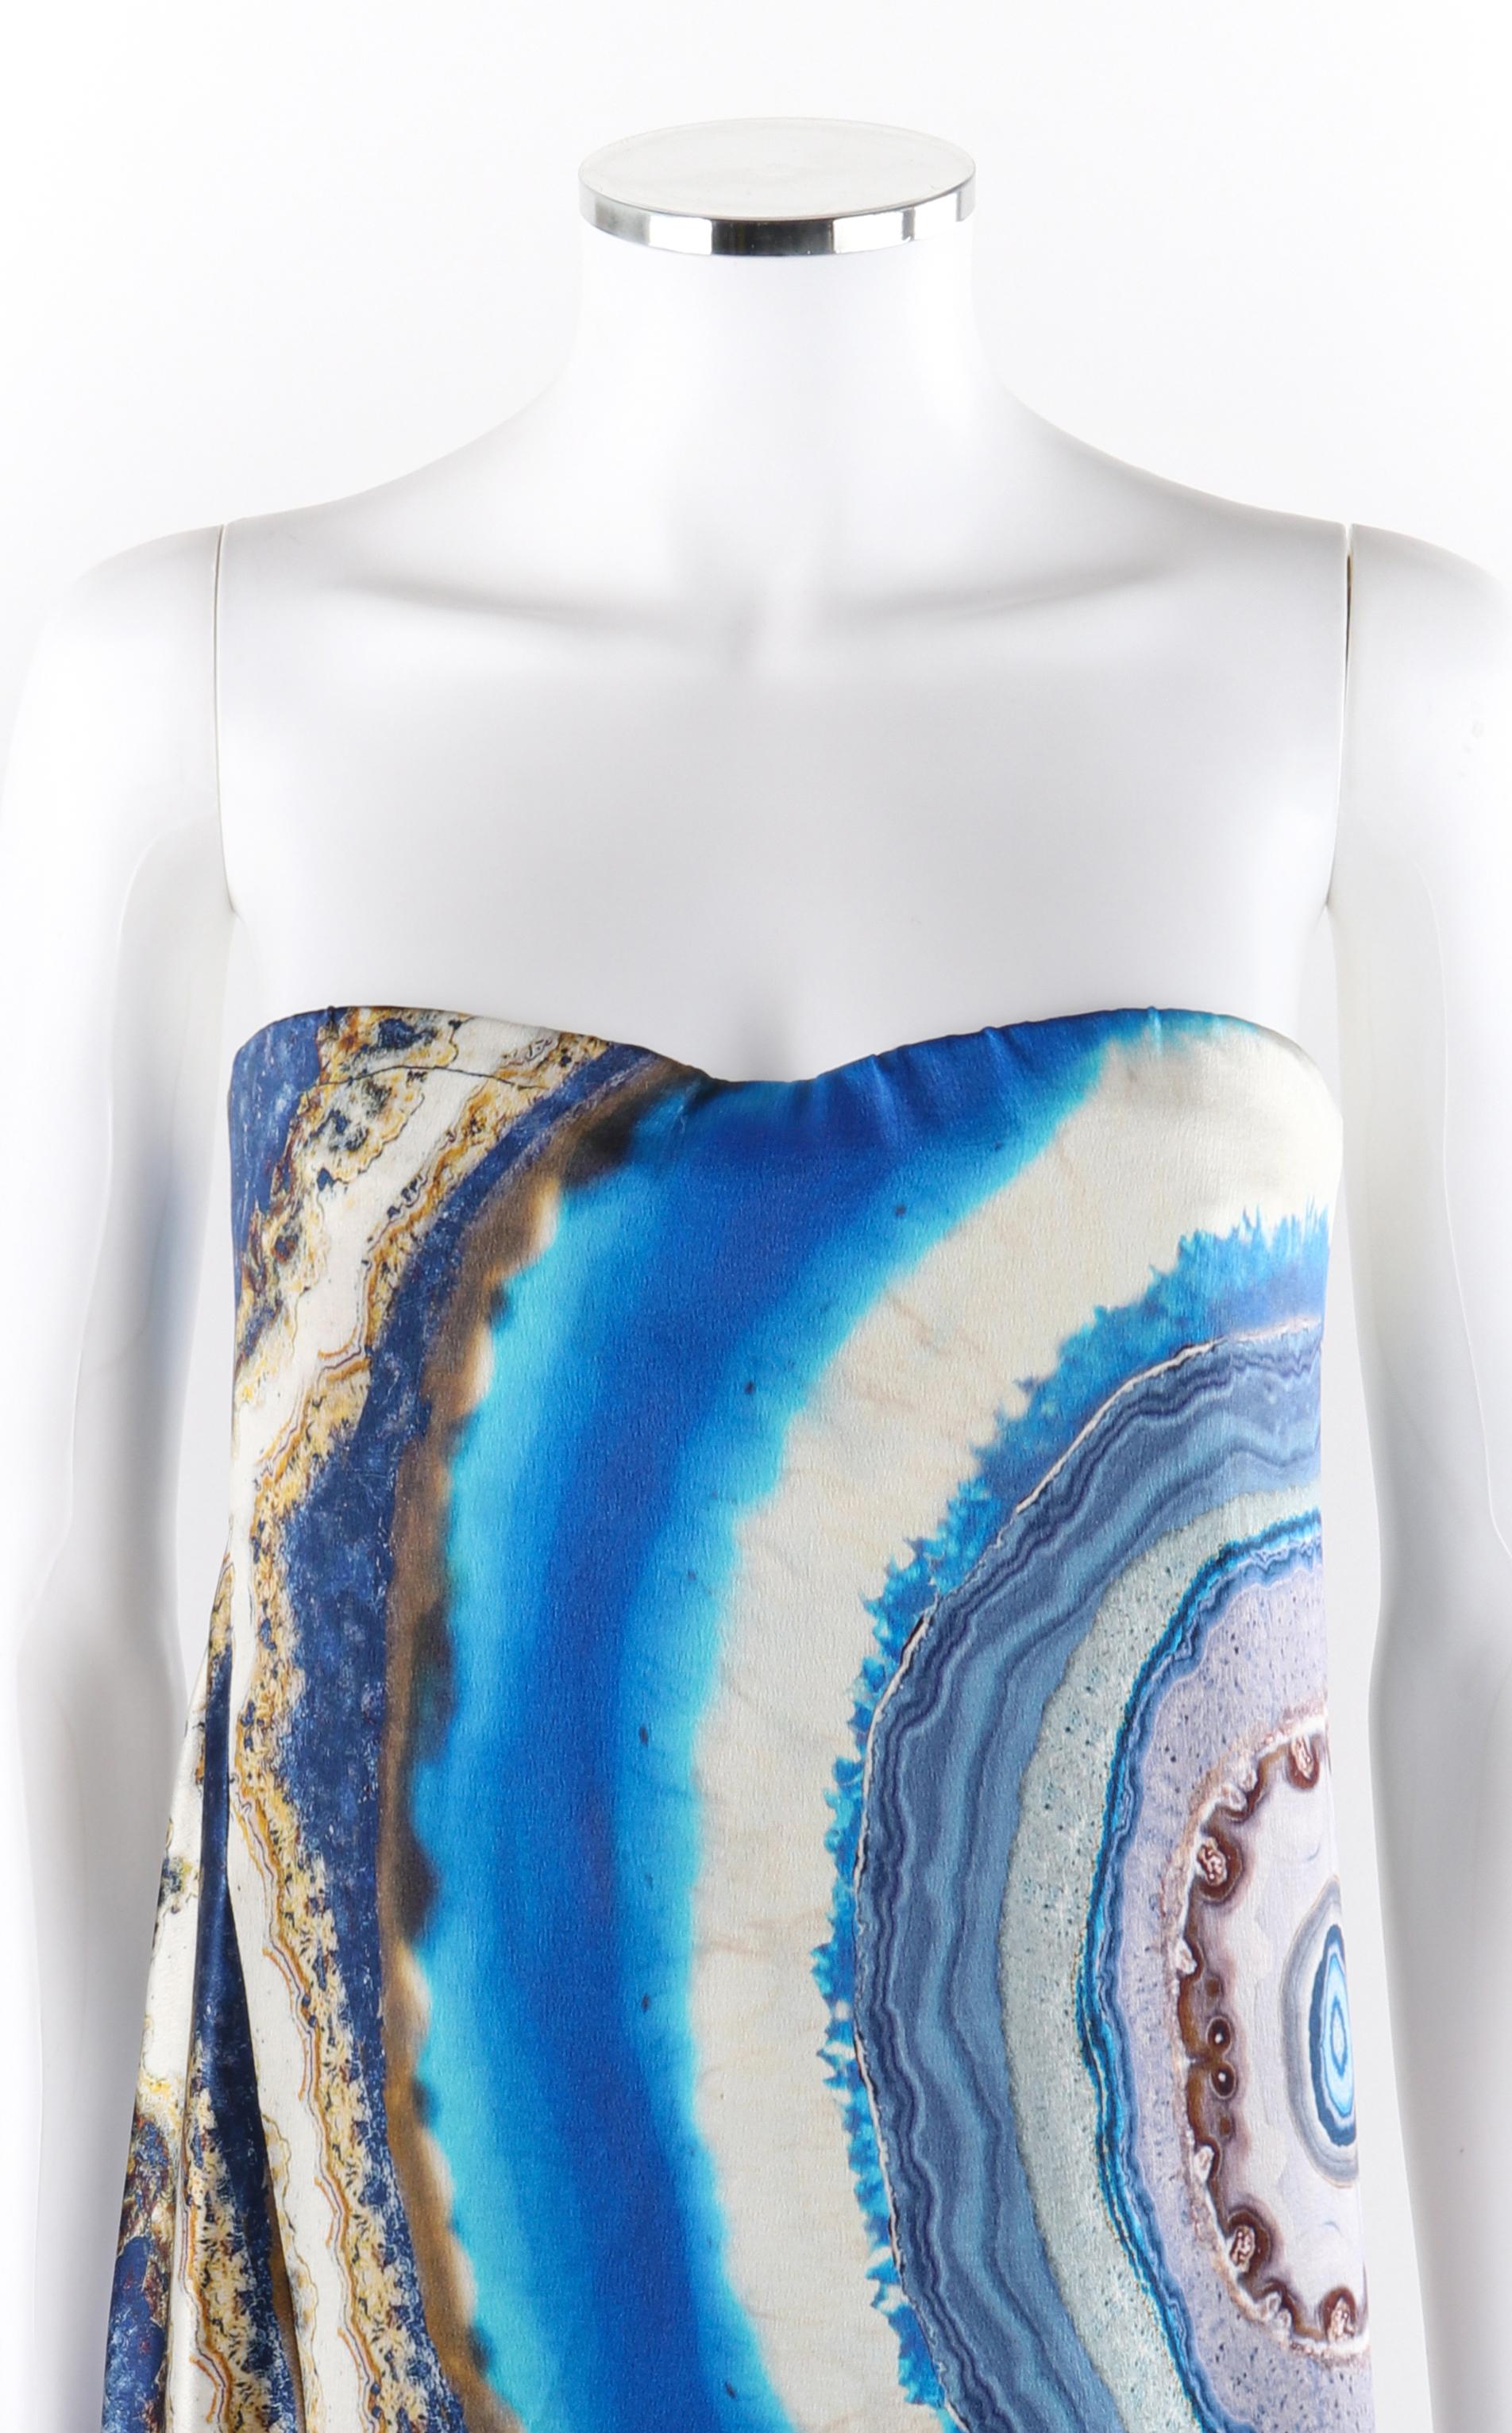 ALEXANDER McQUEEN Resort 2010 Agate Geode Print Strapless Draped Bubble Dress In Good Condition For Sale In Thiensville, WI